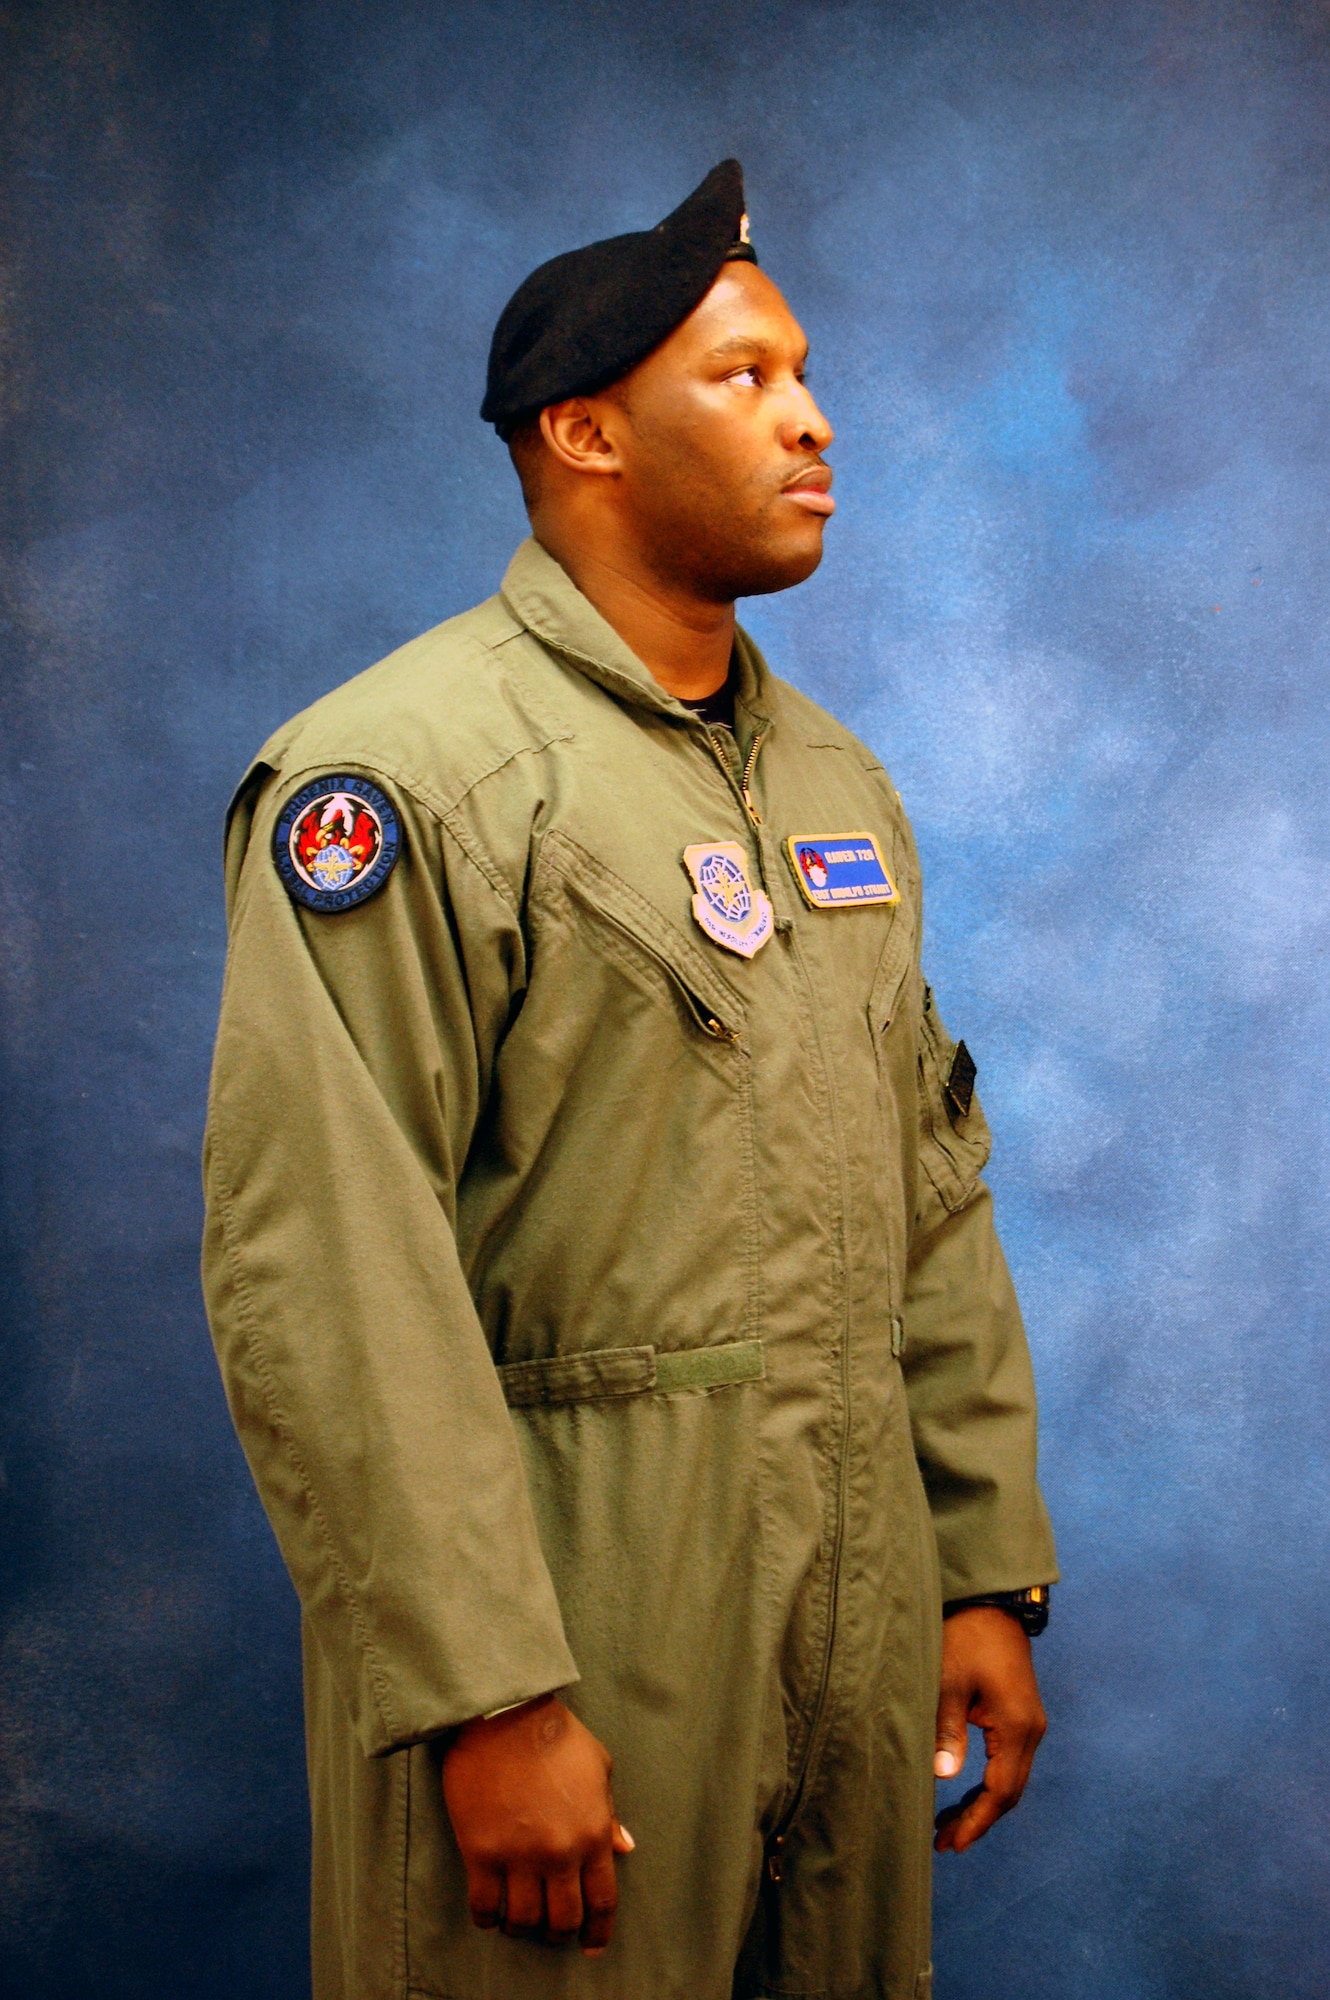 Tech. Sgt. Rudolph Stuart, security forces contingency skills and Raven instructor with the U.S. Air Force Expeditionary Center's 421st Combat Training Squadron, models for a photo Dec. 11, 2008, in the Expeditionary Center studio on Fort Dix, N.J.  The effort was part of preparatory work by an artist from the Air Force Art Program to complete a painting highlighting Expeditionary Center Airmen. (U.S. Air Force Photo/Tech. Sgt. Scott T. Sturkol)